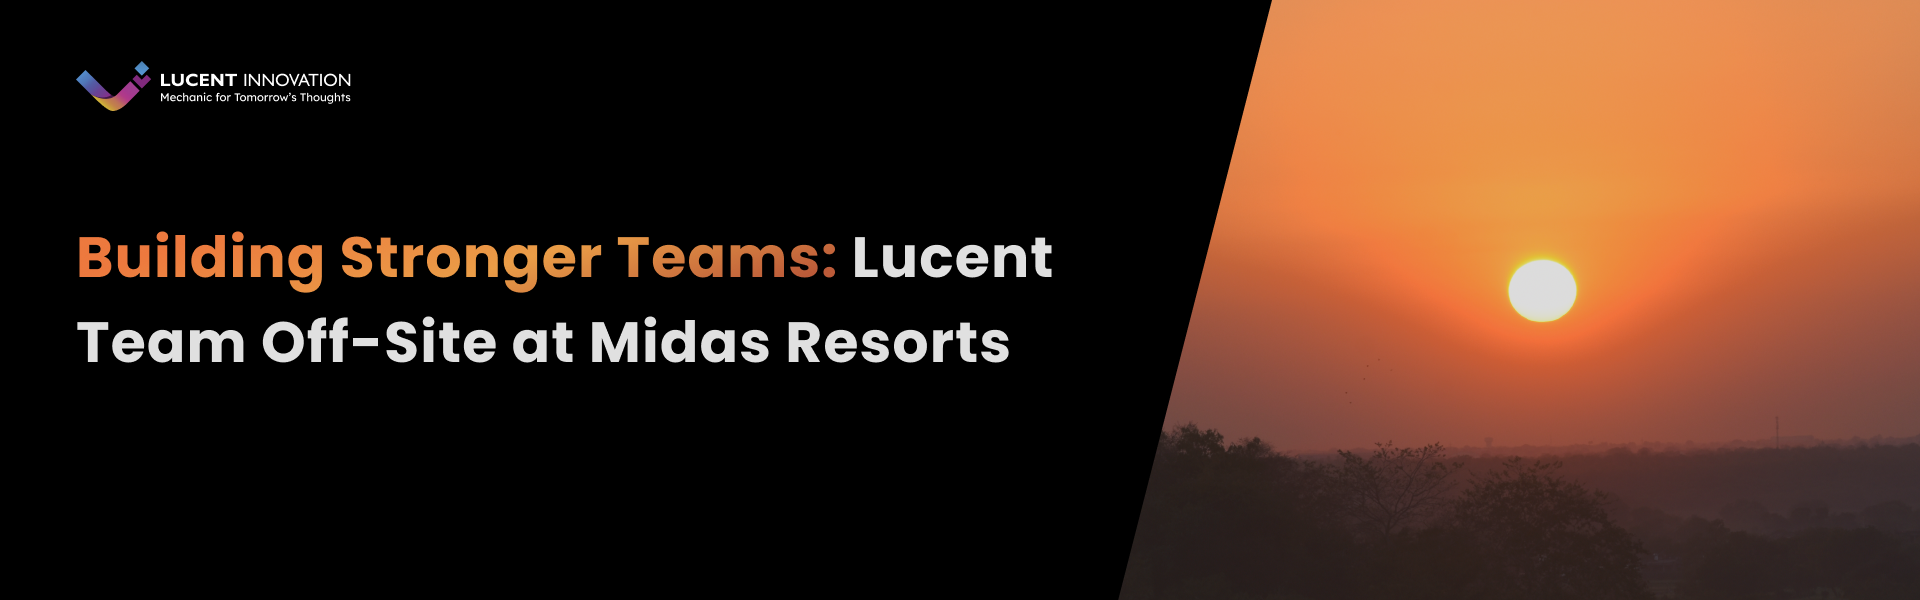 Building Stronger Teams: Lucent Team Off-Site at Midas Resorts